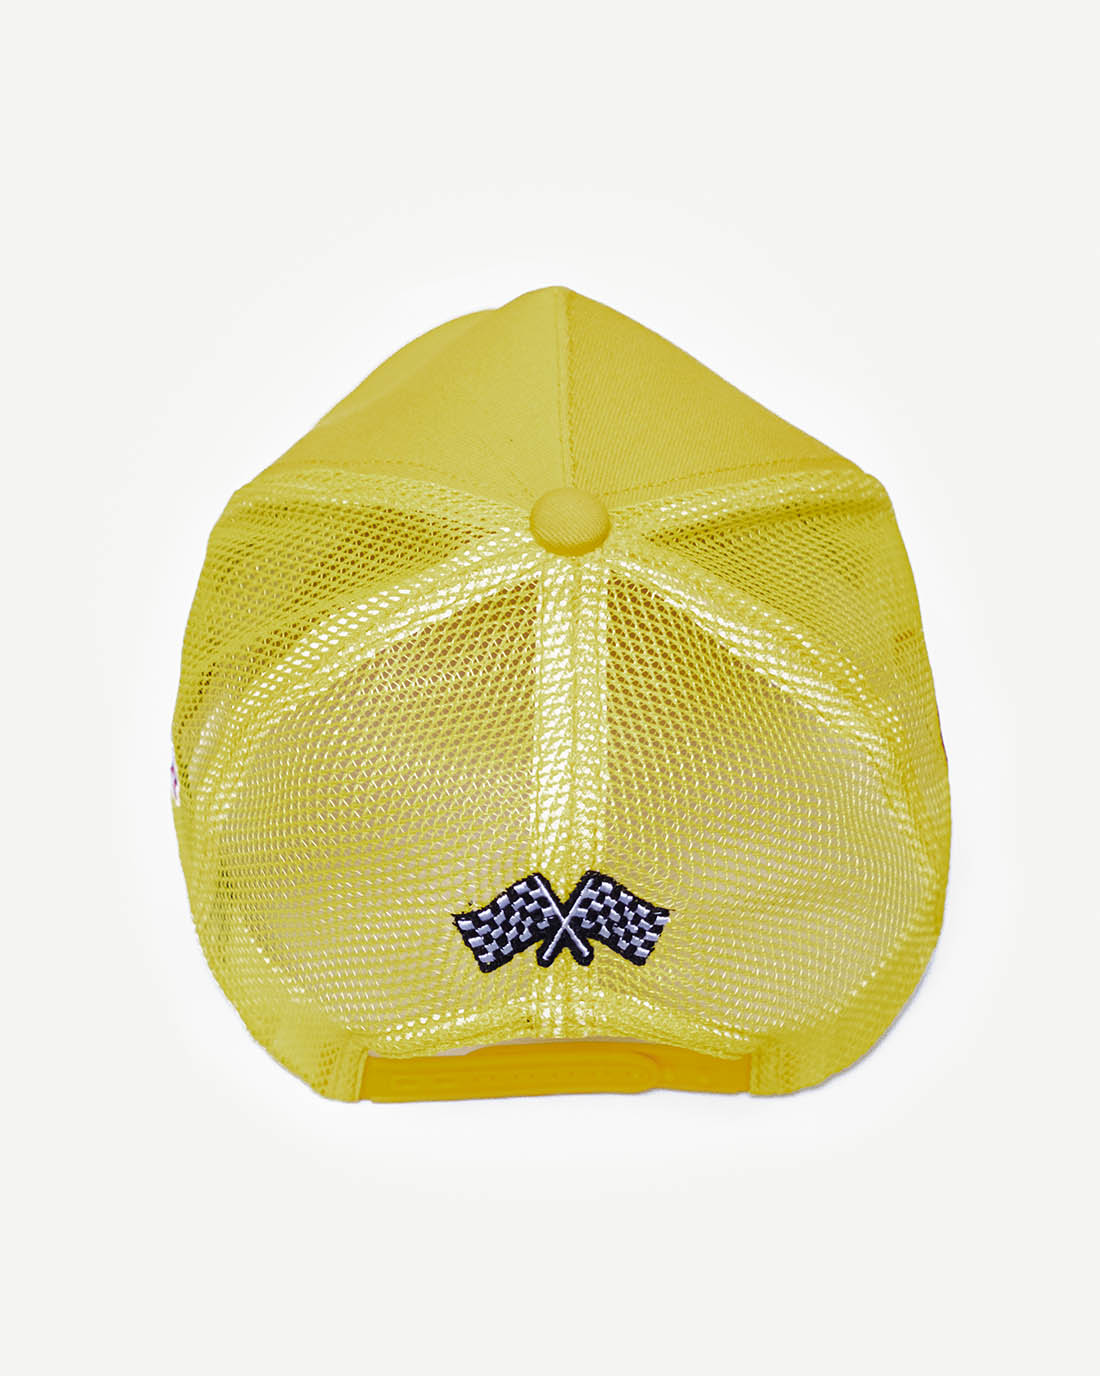 Rear view of a sporty yellow snapback hat with racing-inspired embroidered design and cooling mesh back.